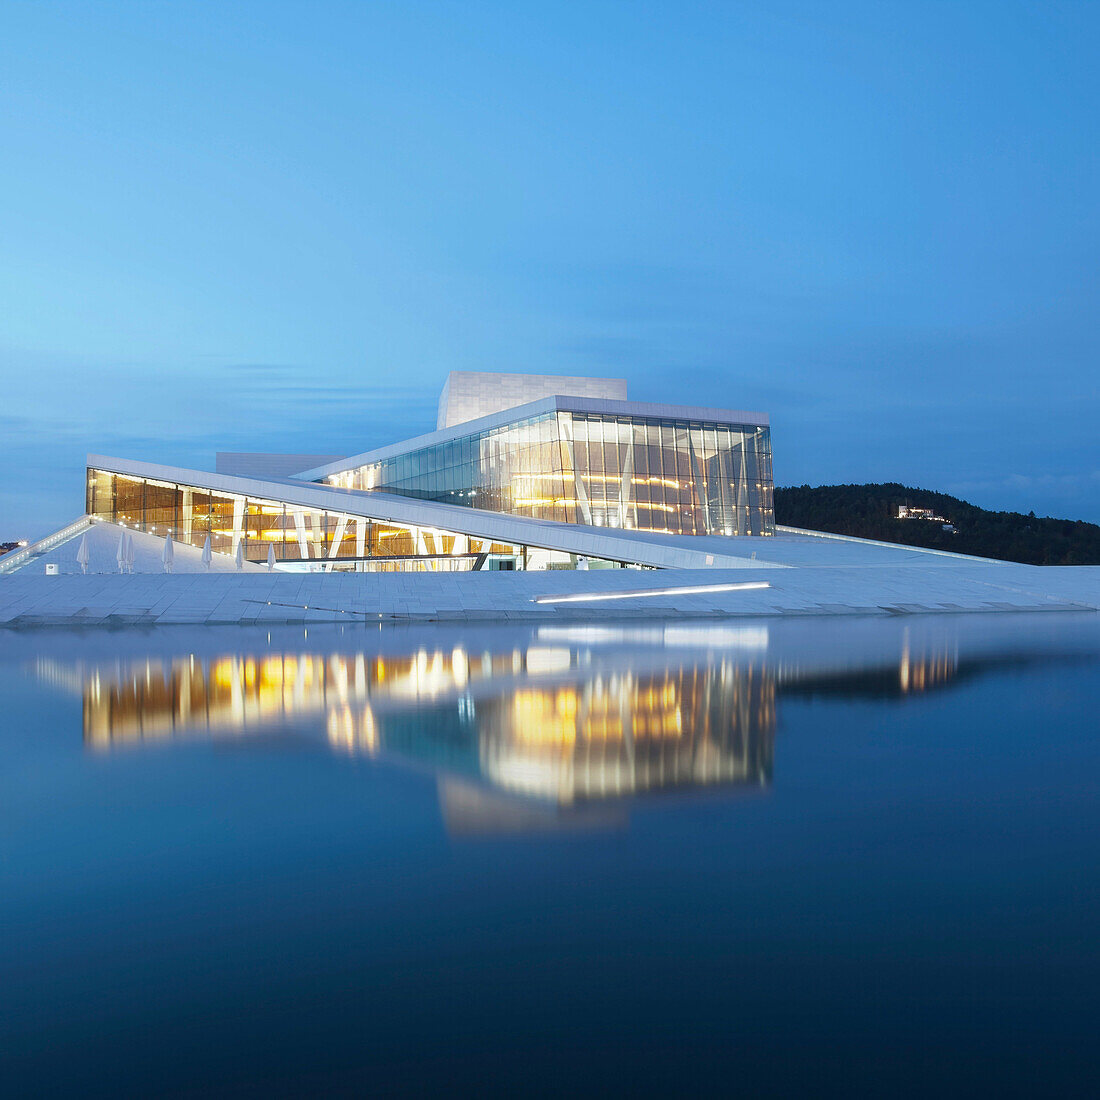 Oslo Opera House. The Oslo Opera House is situated at the head of Oslo Fjord in the city center. The building was designed by architects Snohetta and opened in 2008.